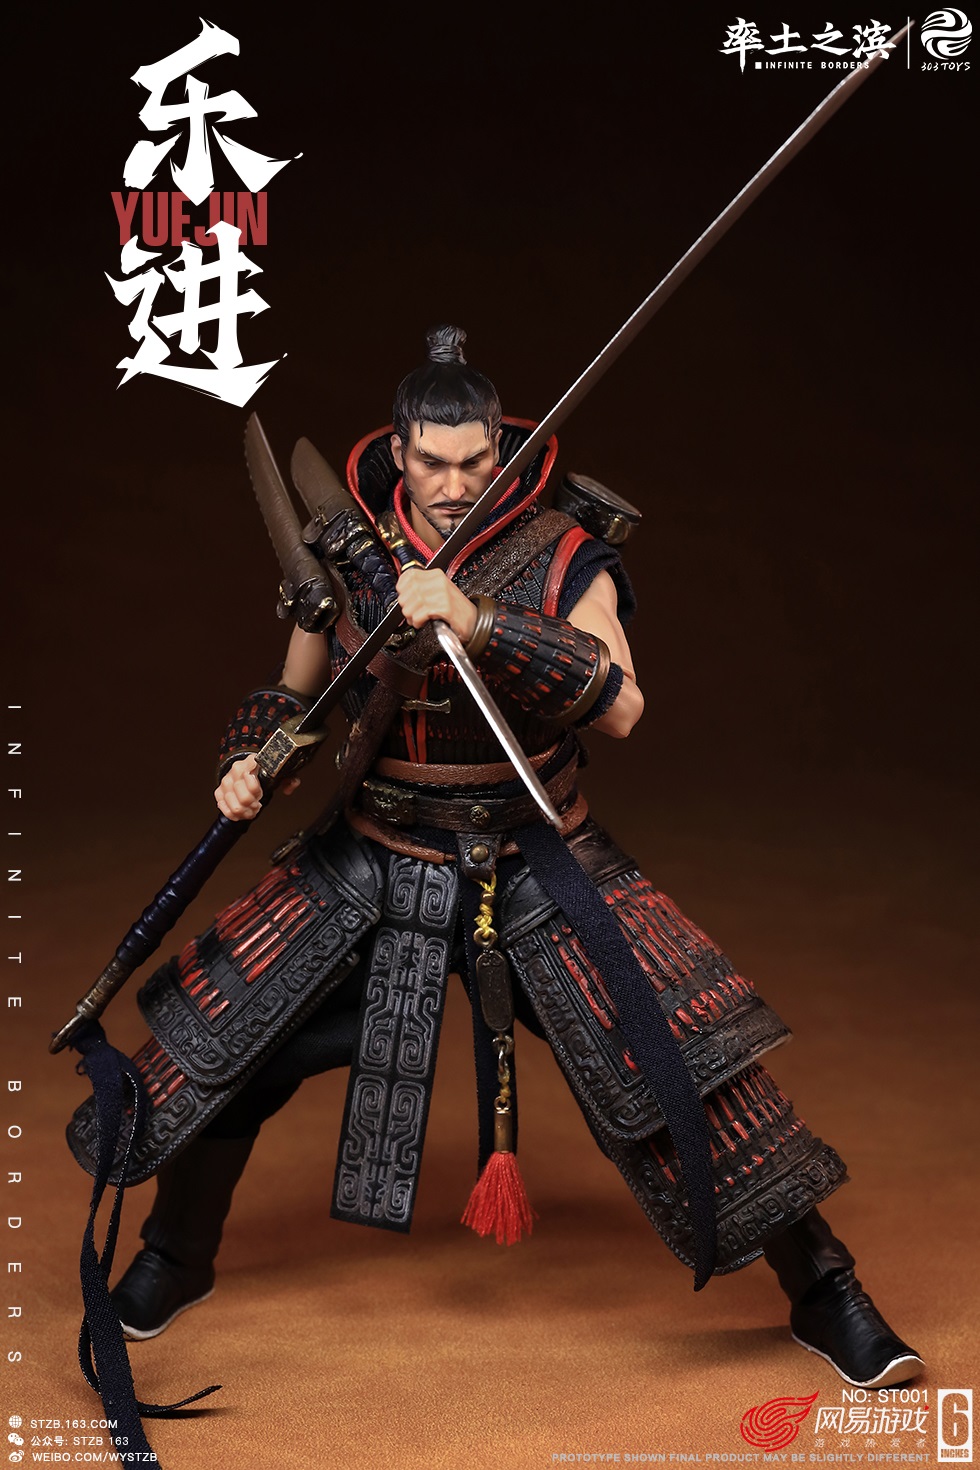 NEW PRODUCT: INFINITE BORDERS X 303TOYS 1/12 - The Five Sons of Elite Generals: Yue Jin ST001 09141